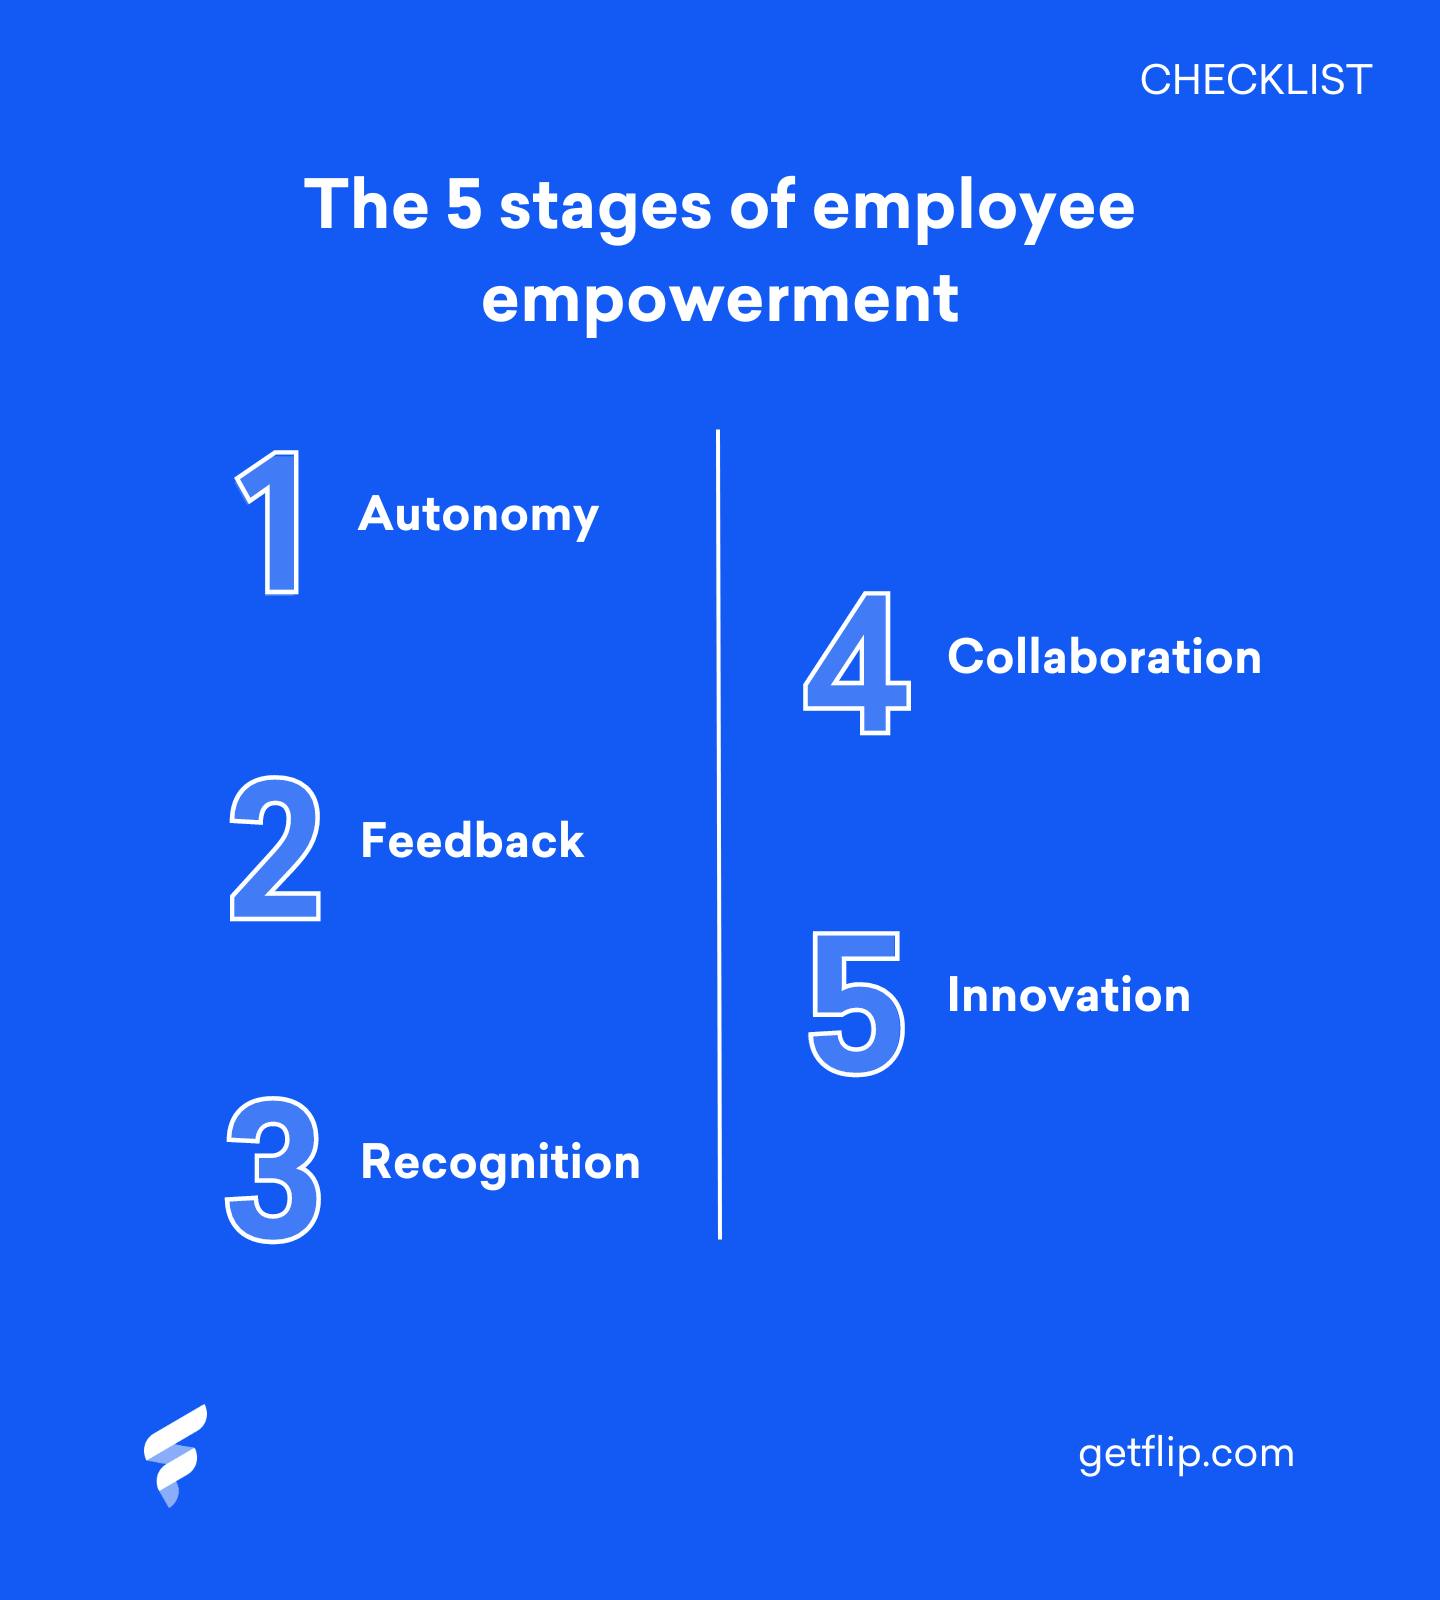 A checklist showing the 5 stages of employee empowerment